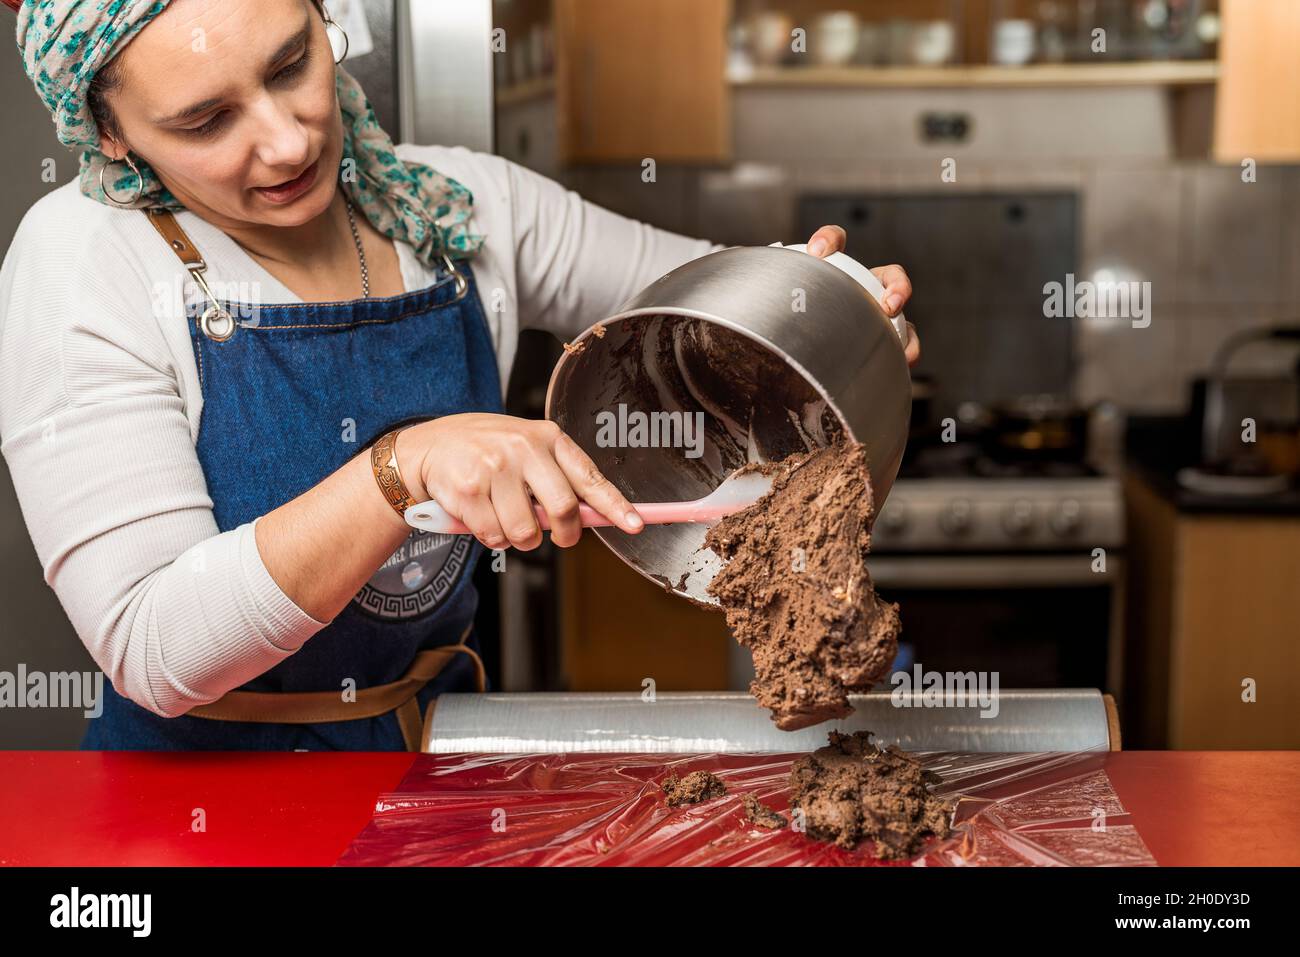 Female cook removing the mixture of ingredients from a pot on a kitchen transparent film for the preparation of the homemade Argentine alfajores recip Stock Photo